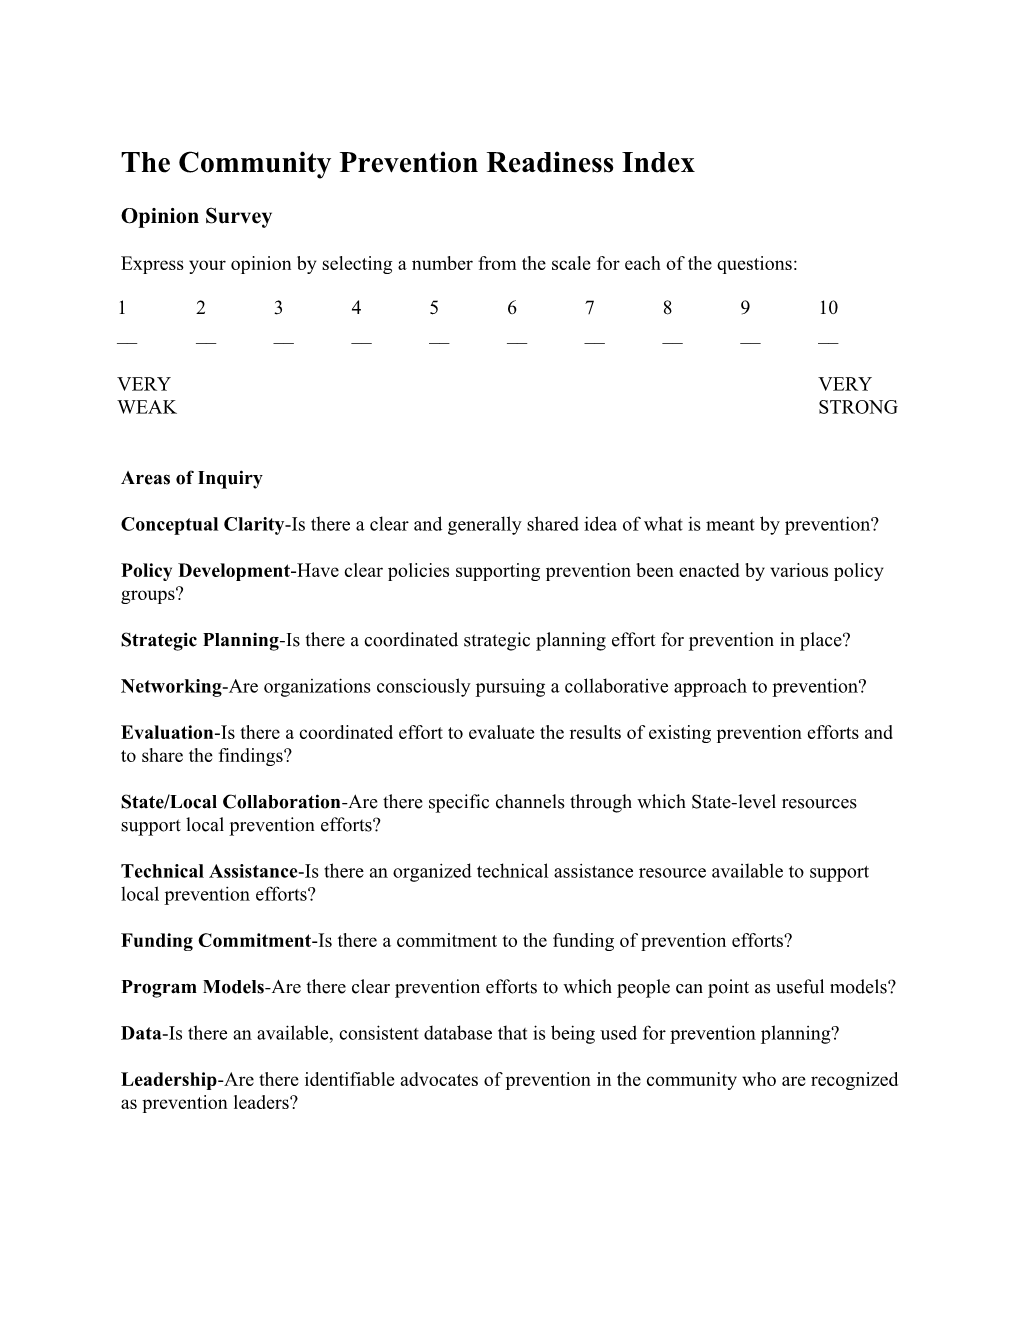 Community Prevention Readiness Index